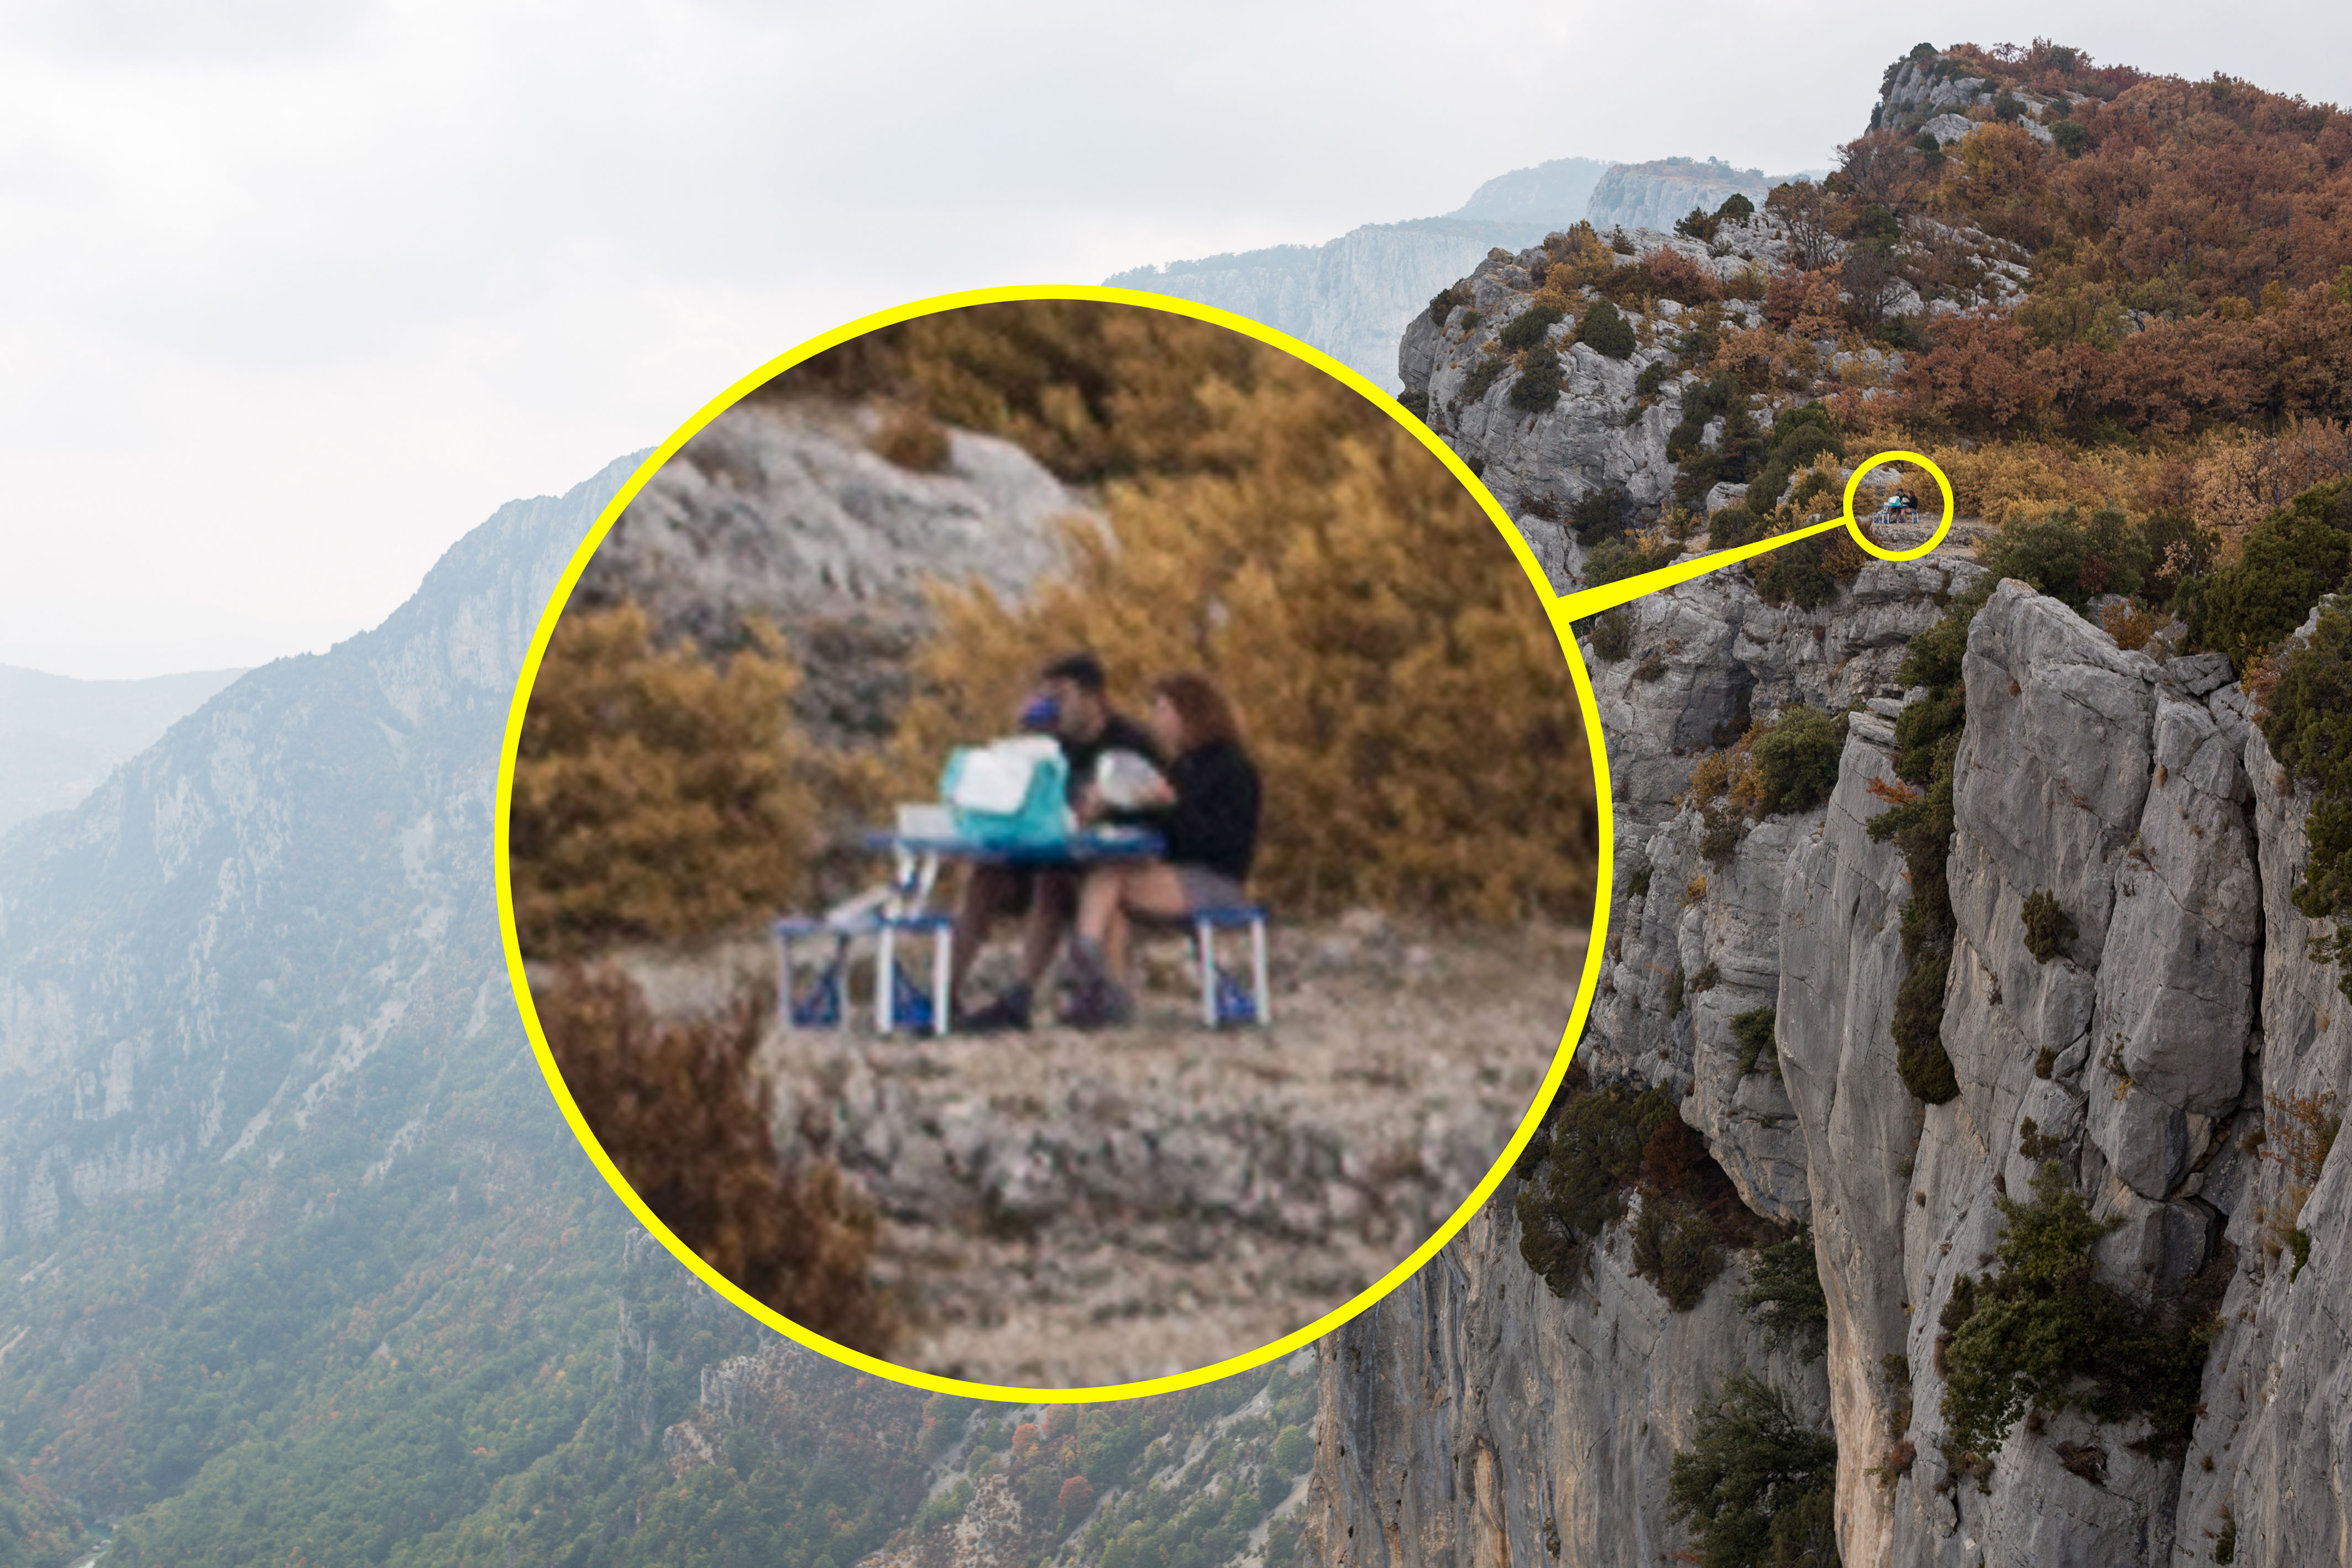 Picnic at hanging rock! Couple spotted enjoying picnic on cliff edge ...